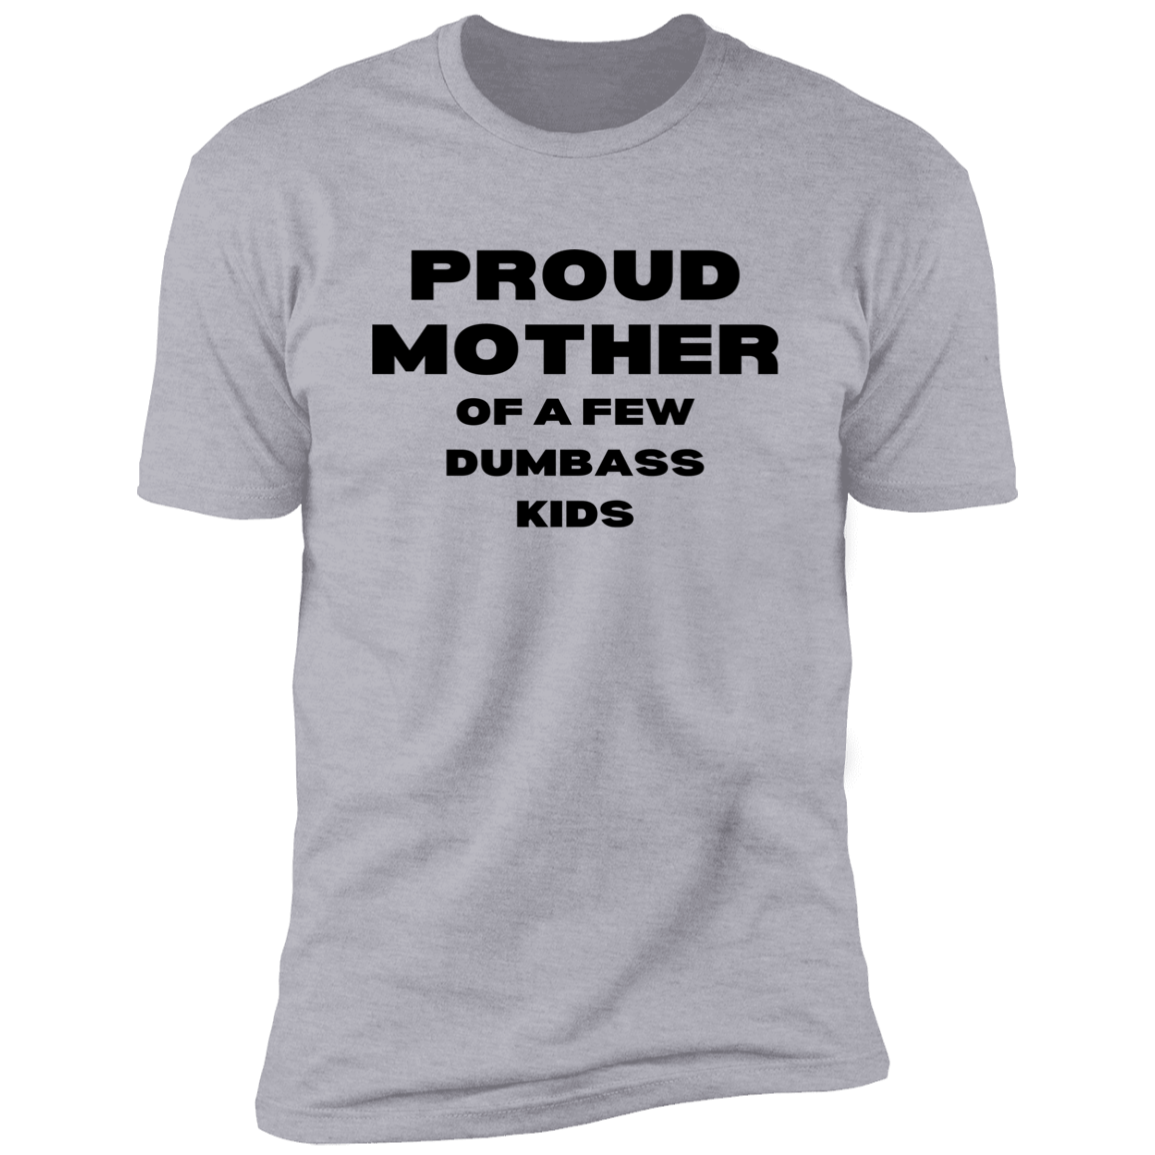 Proud Father/Mother (T-Shirt)